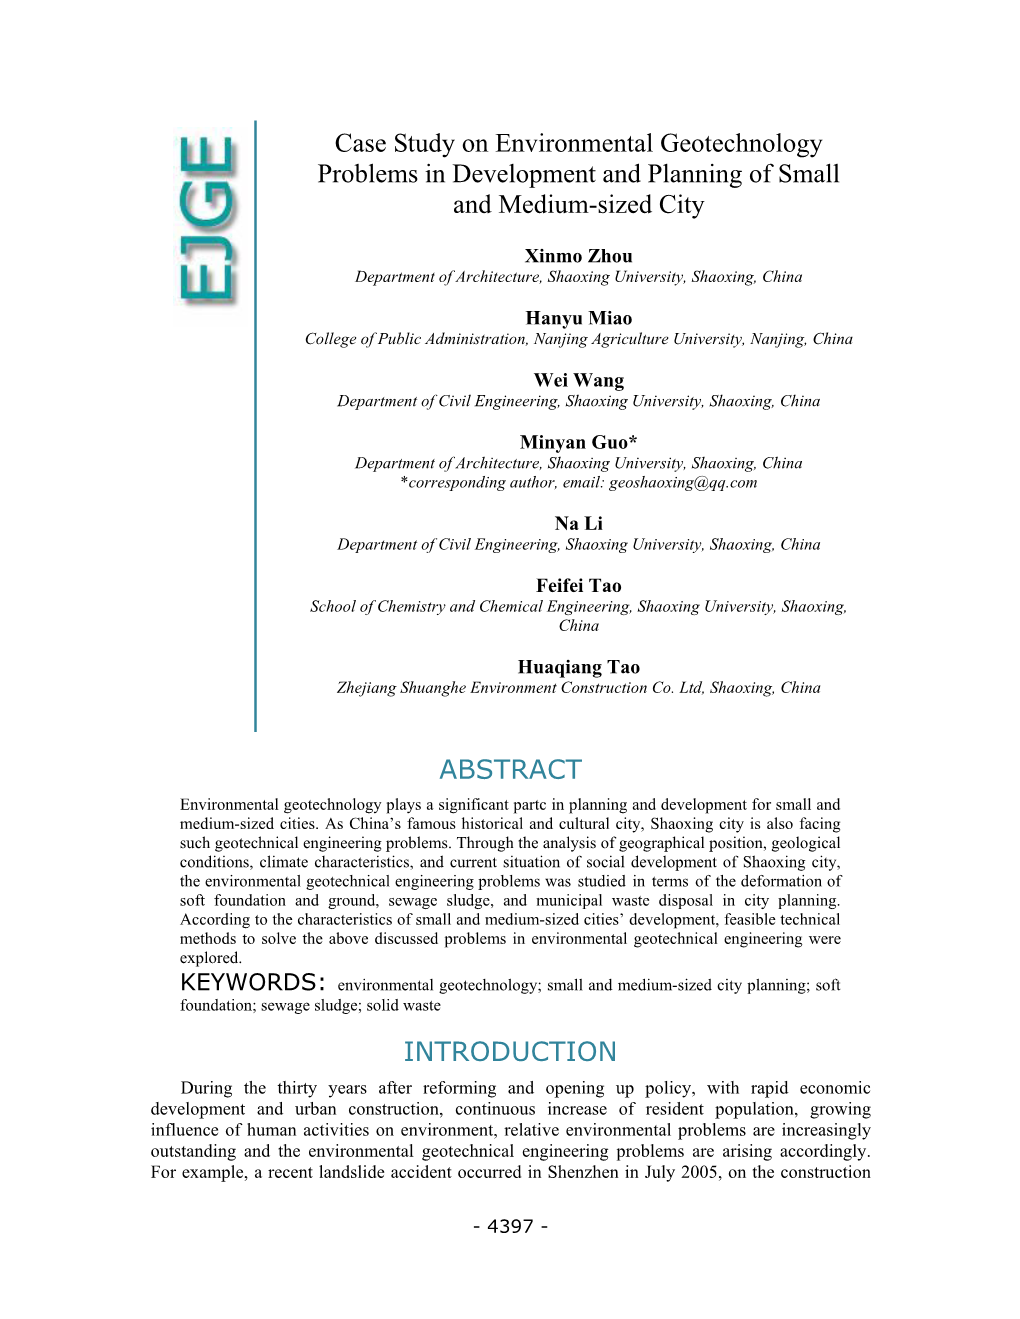 Case Study on Environmental Geotechnology Problems in Development and Planning of Small and Medium-Sized City